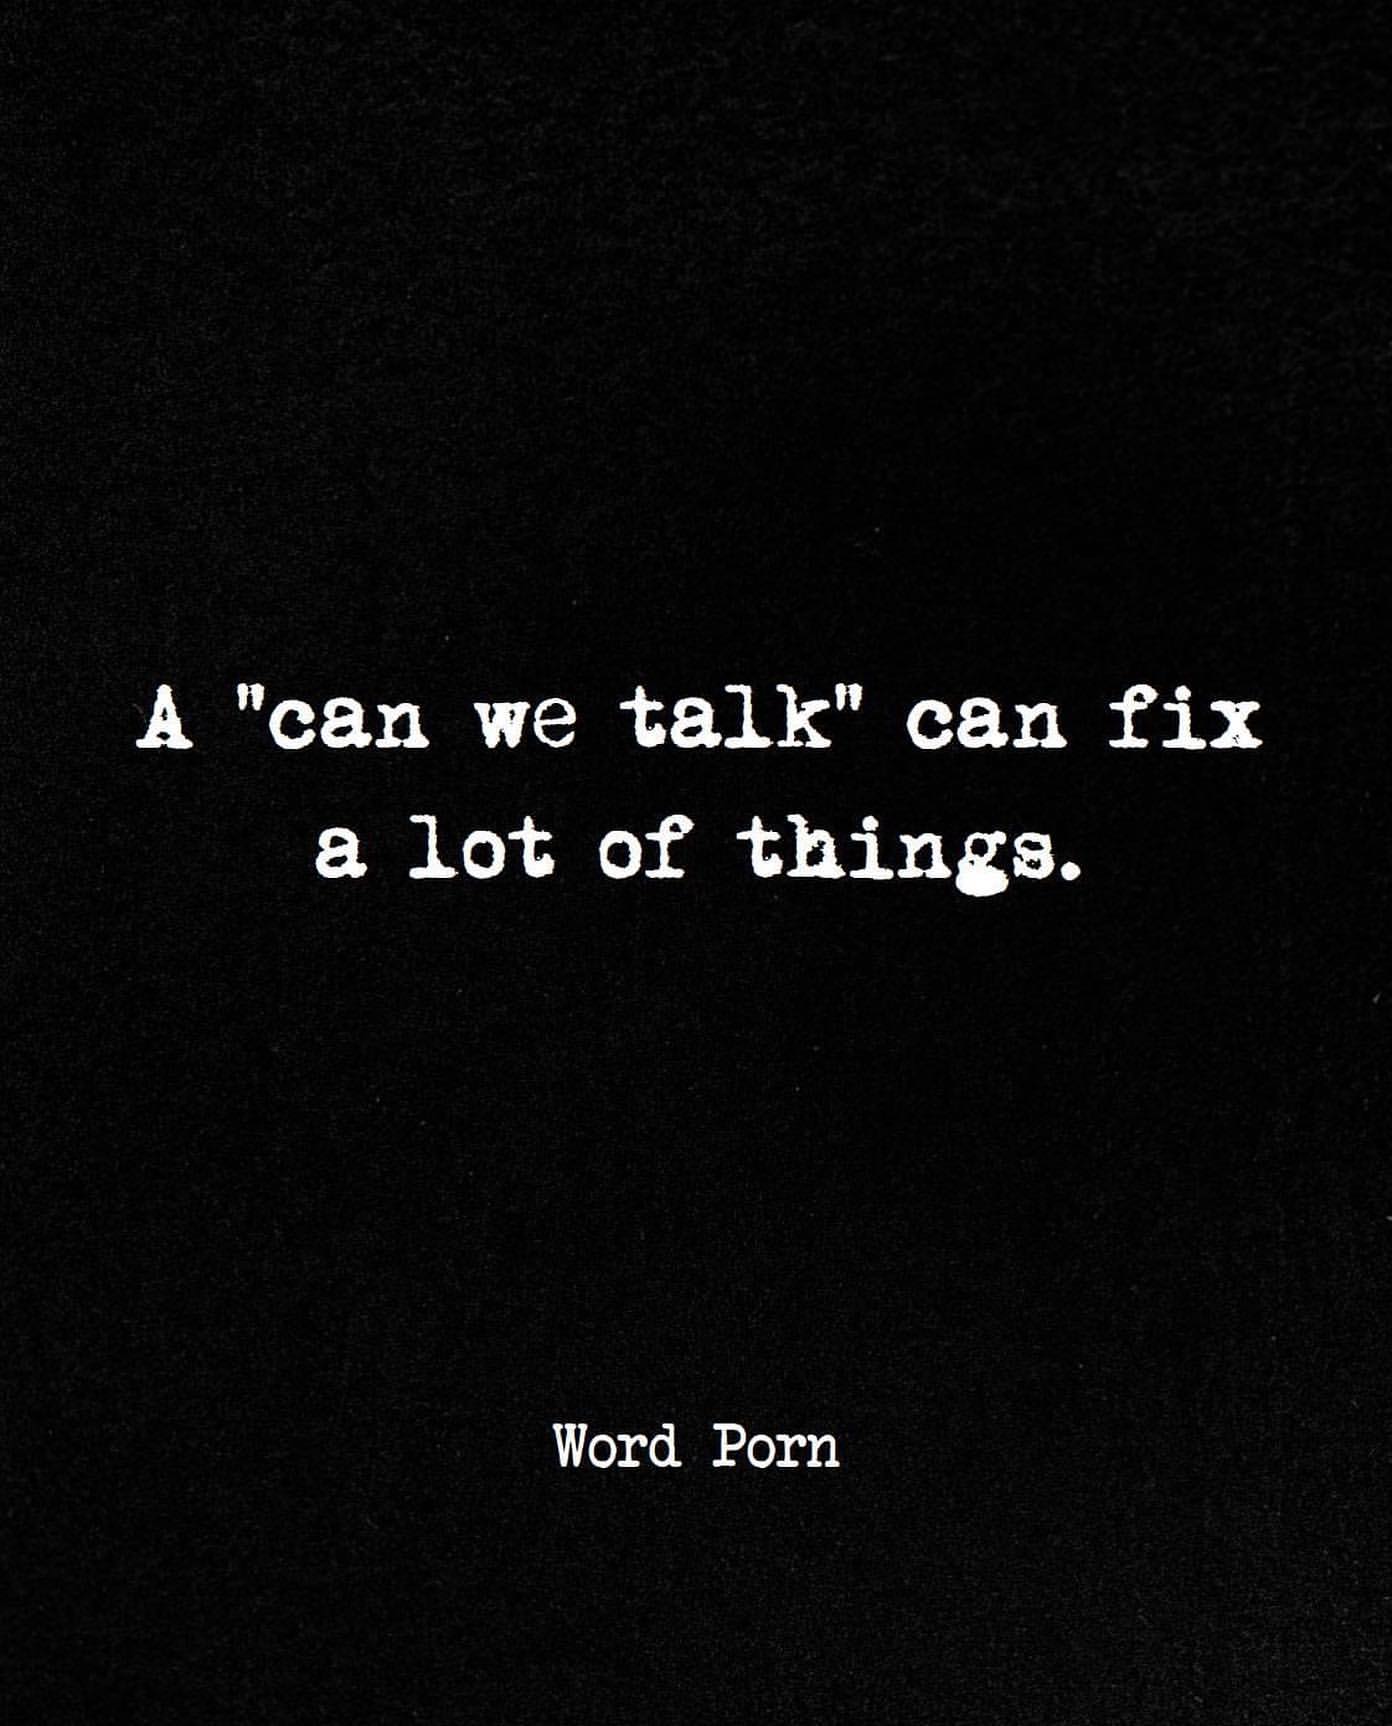 A "can we talk" can fix a lot of things.